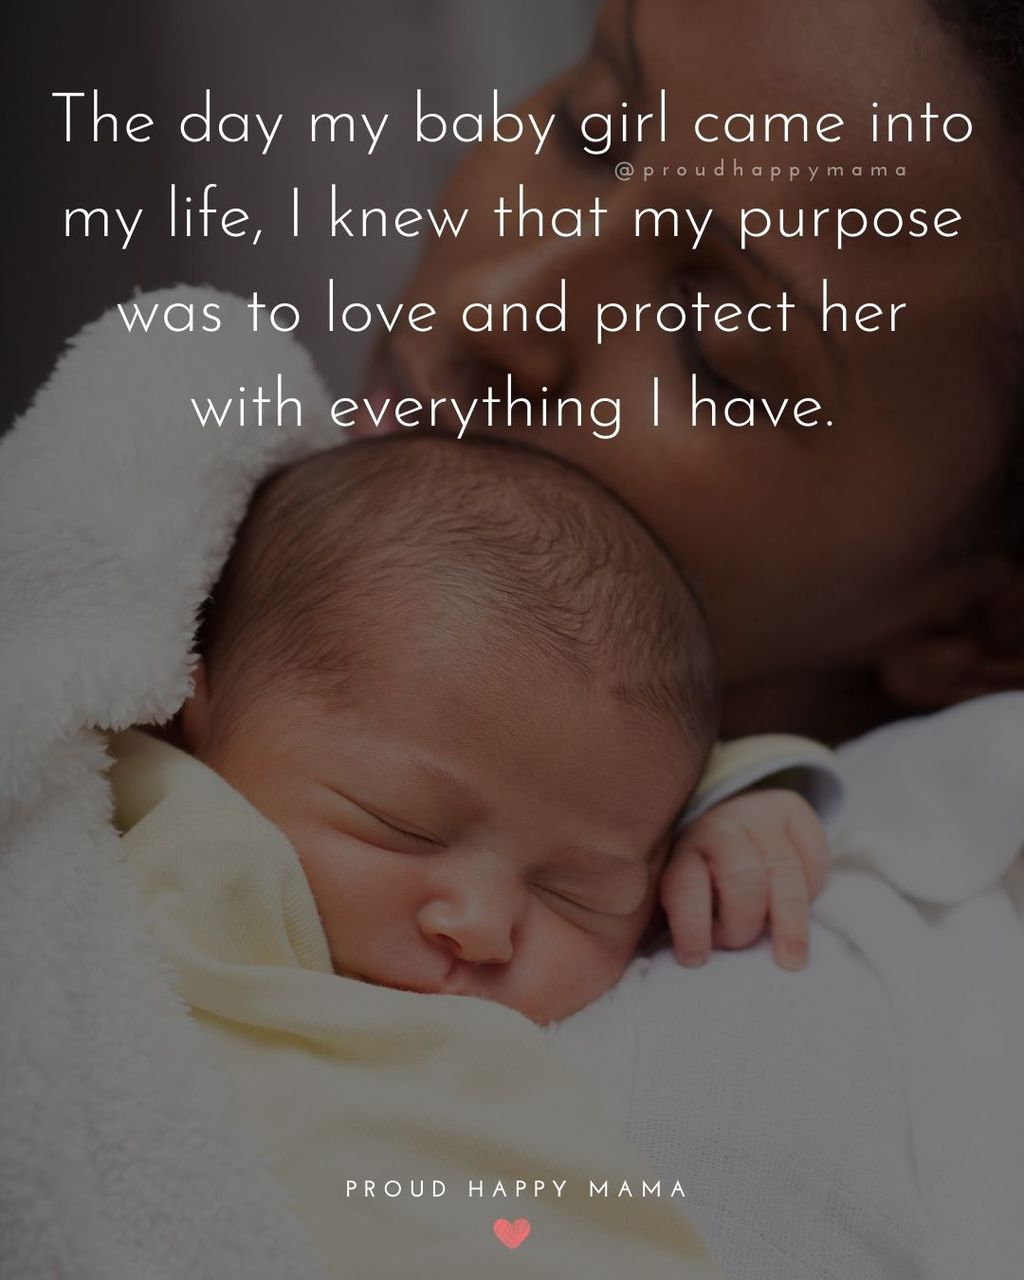 Baby Girl Quotes - The day my baby girl came into my life, I knew that my purpose was to love and protect her with everything I have.